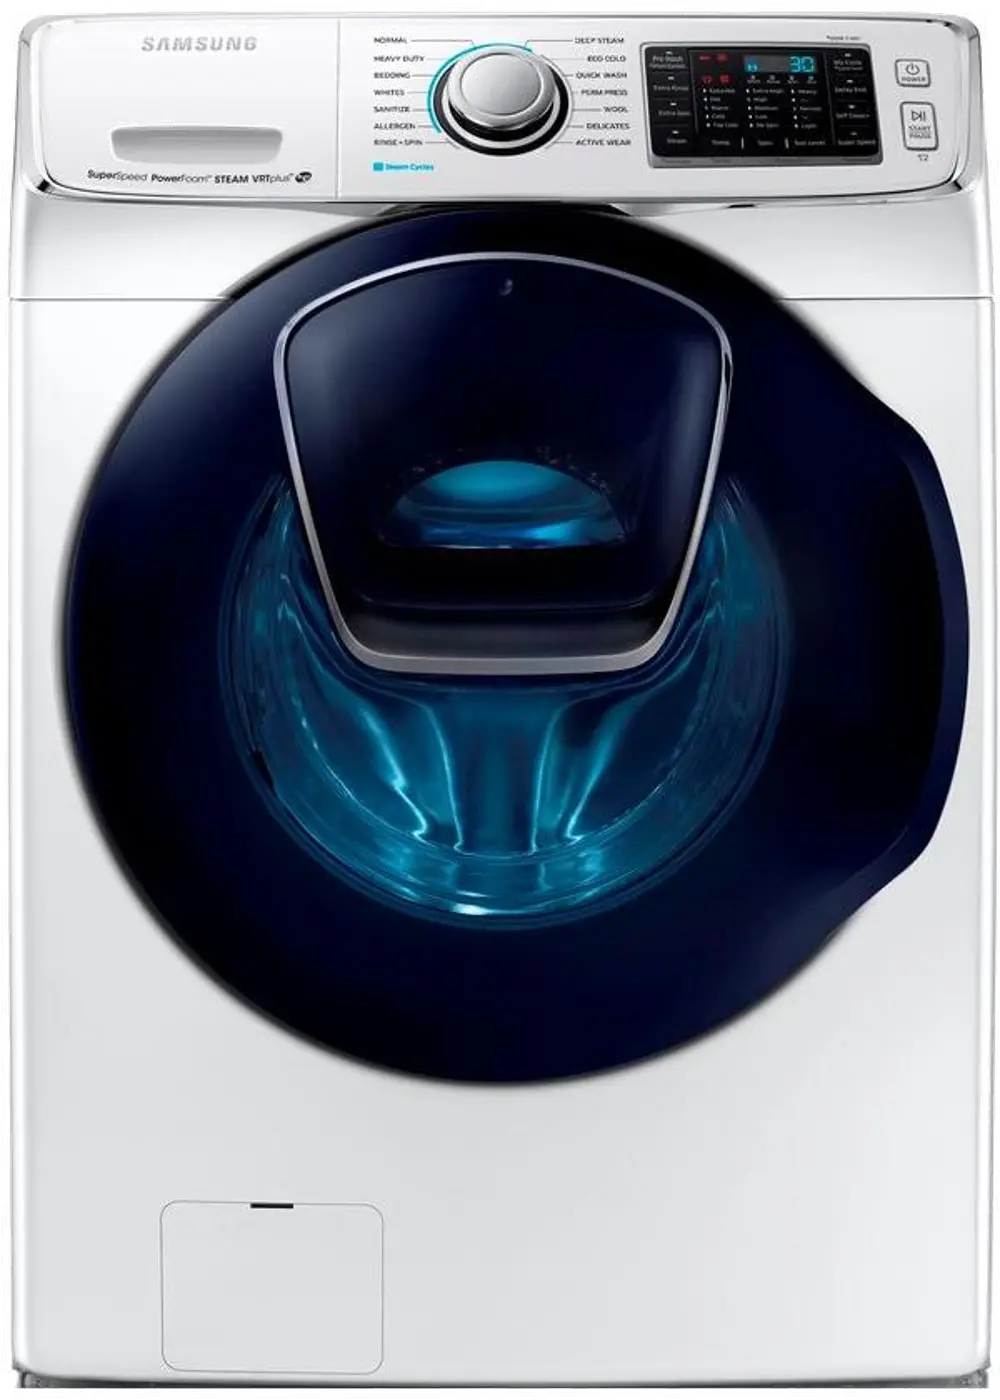 WF50K7500AW Samsung 5.0 cu. ft. Front Load Washer - White-1